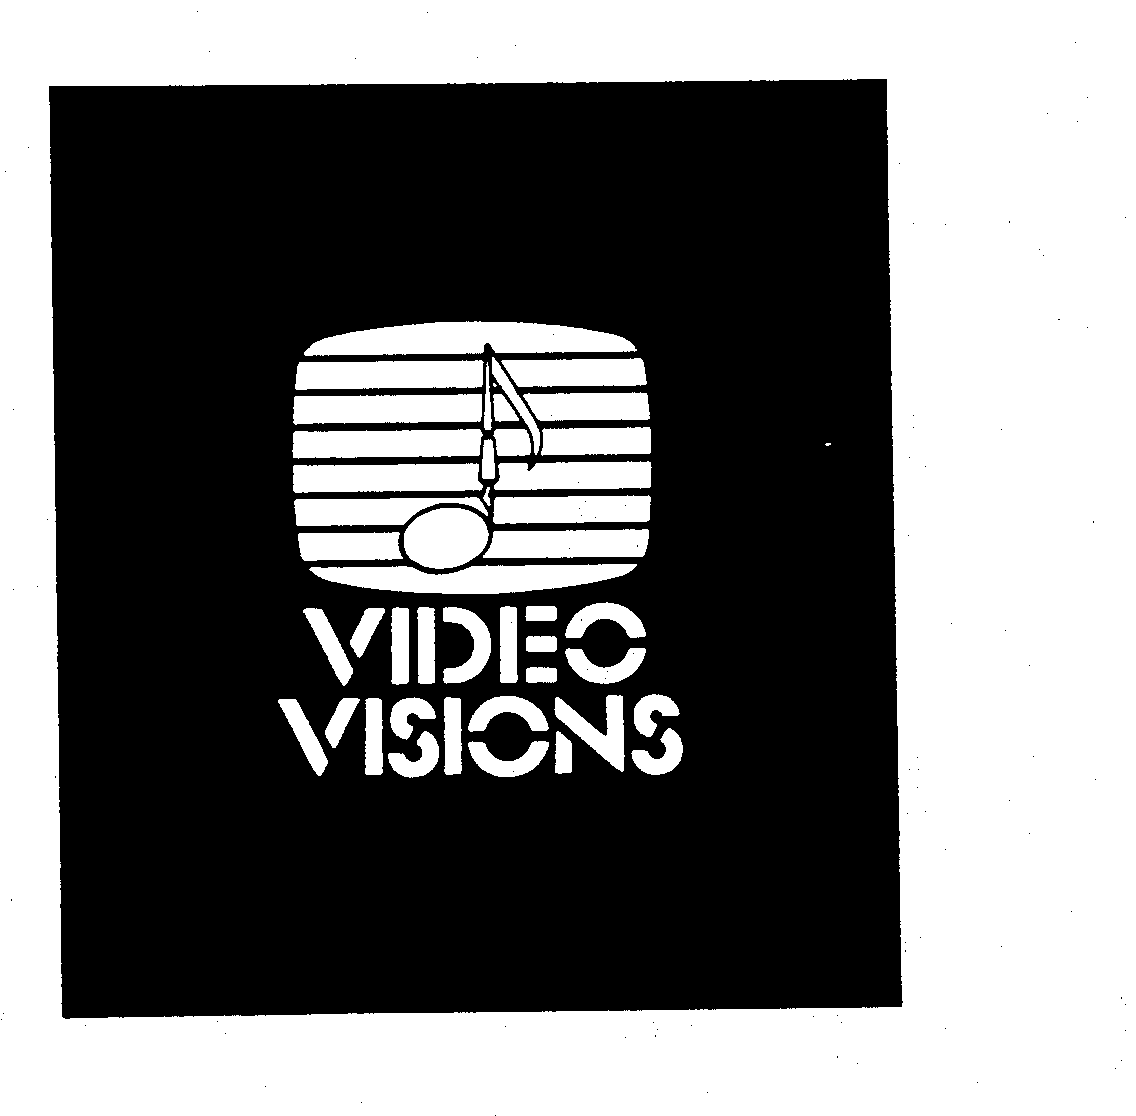  VIDEO VISIONS